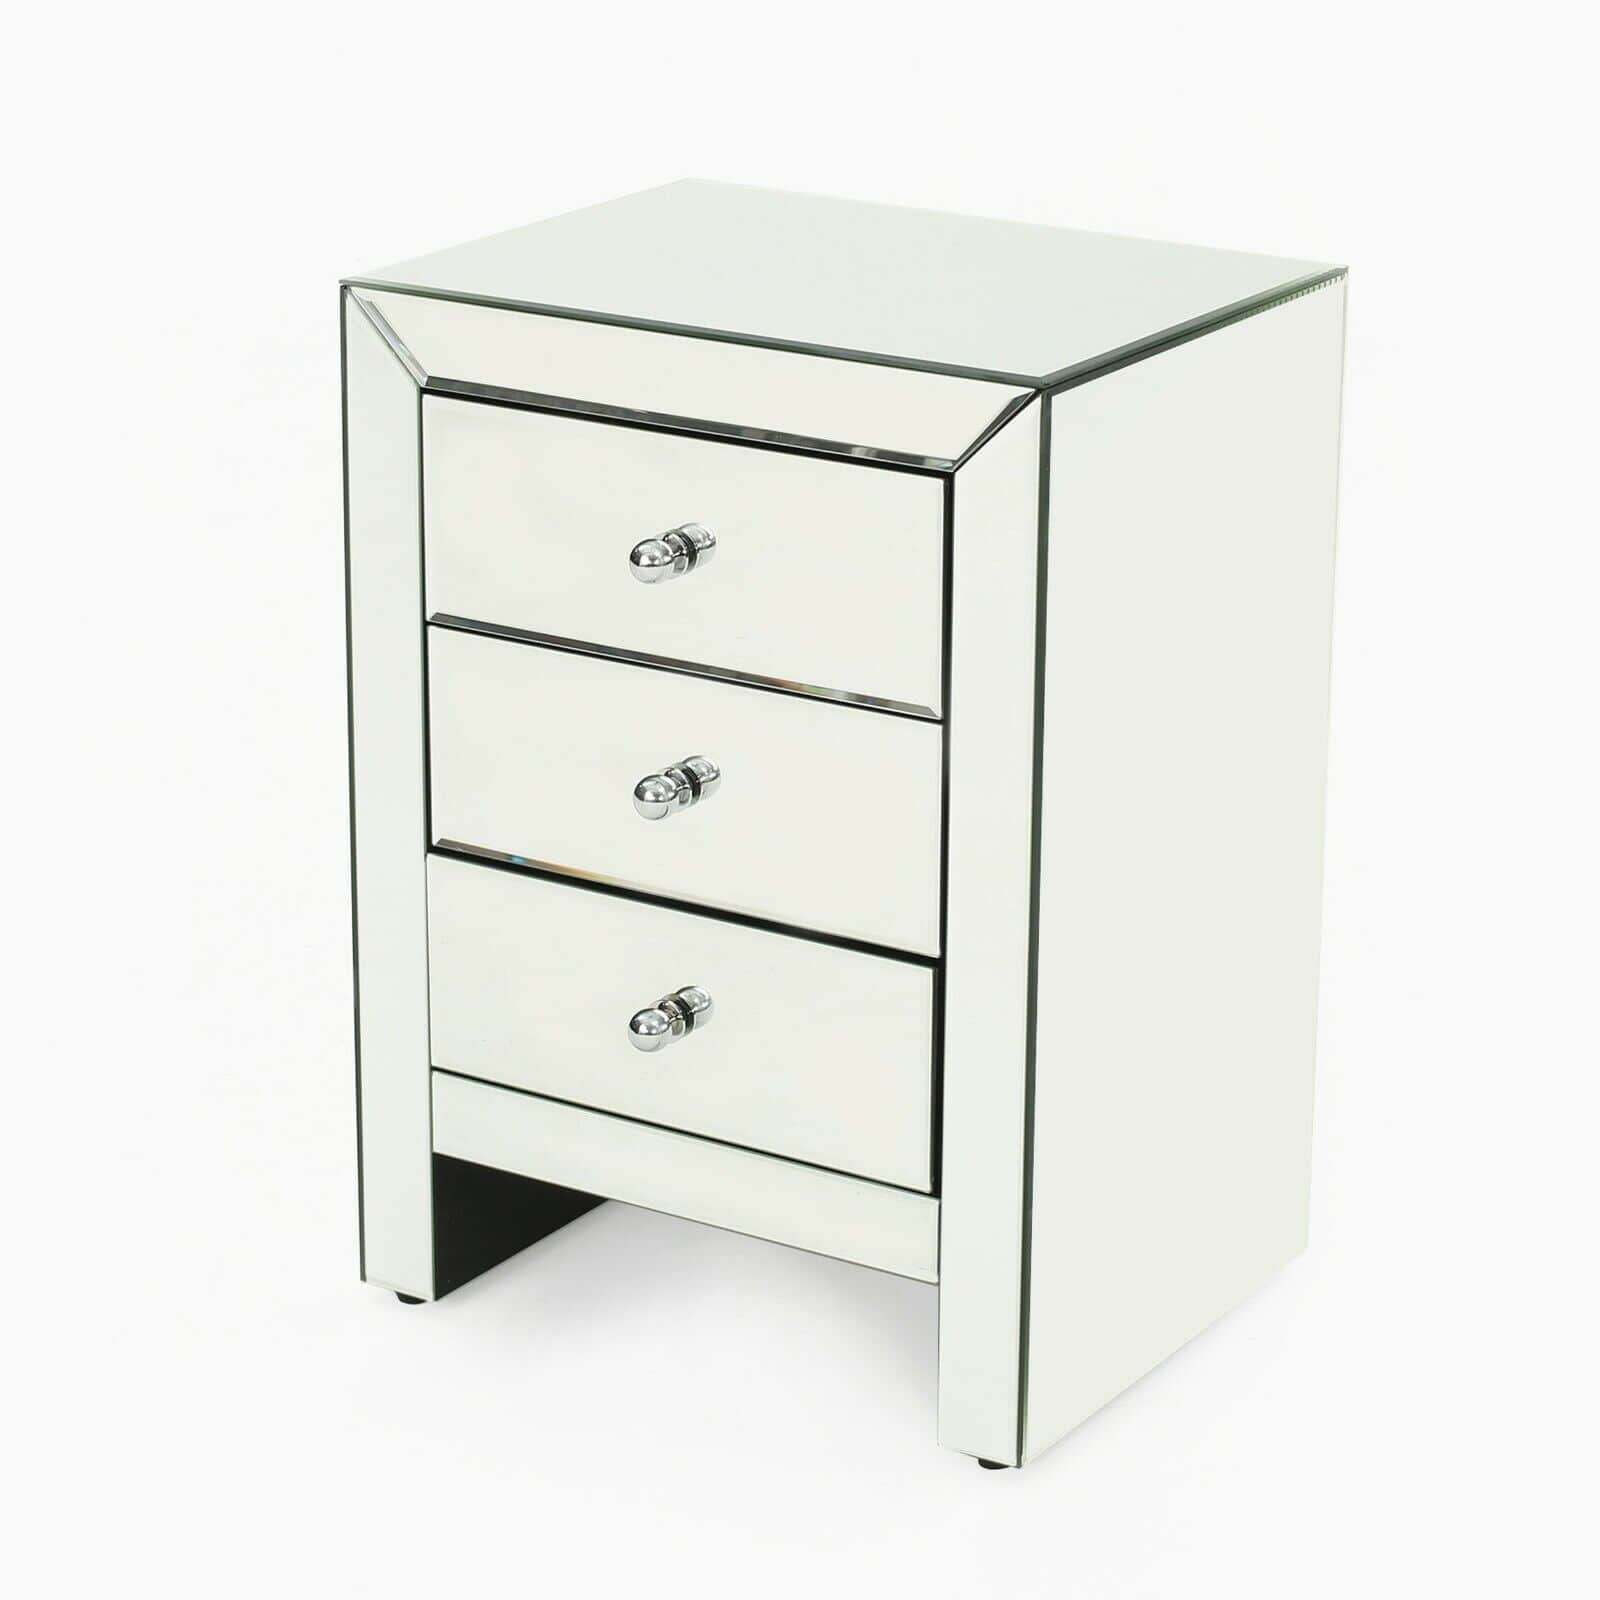 A mirrored nightstand with three drawers.